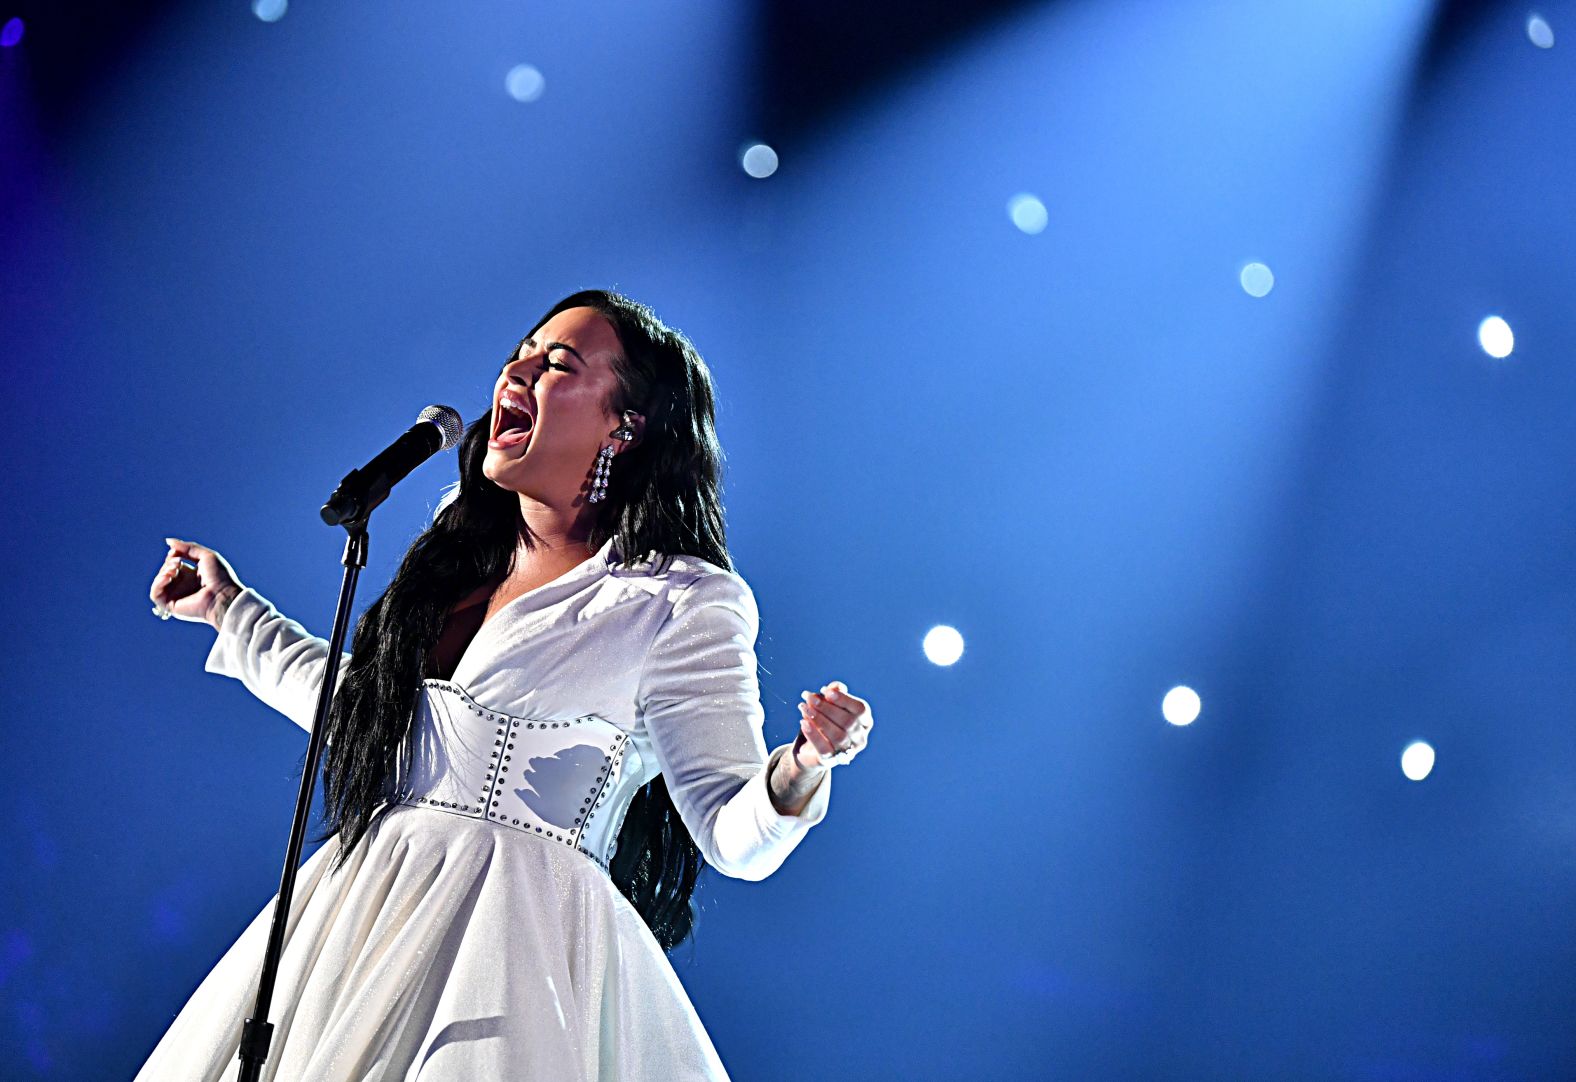 Demi Lovato performs in her first major performance since her overdose.